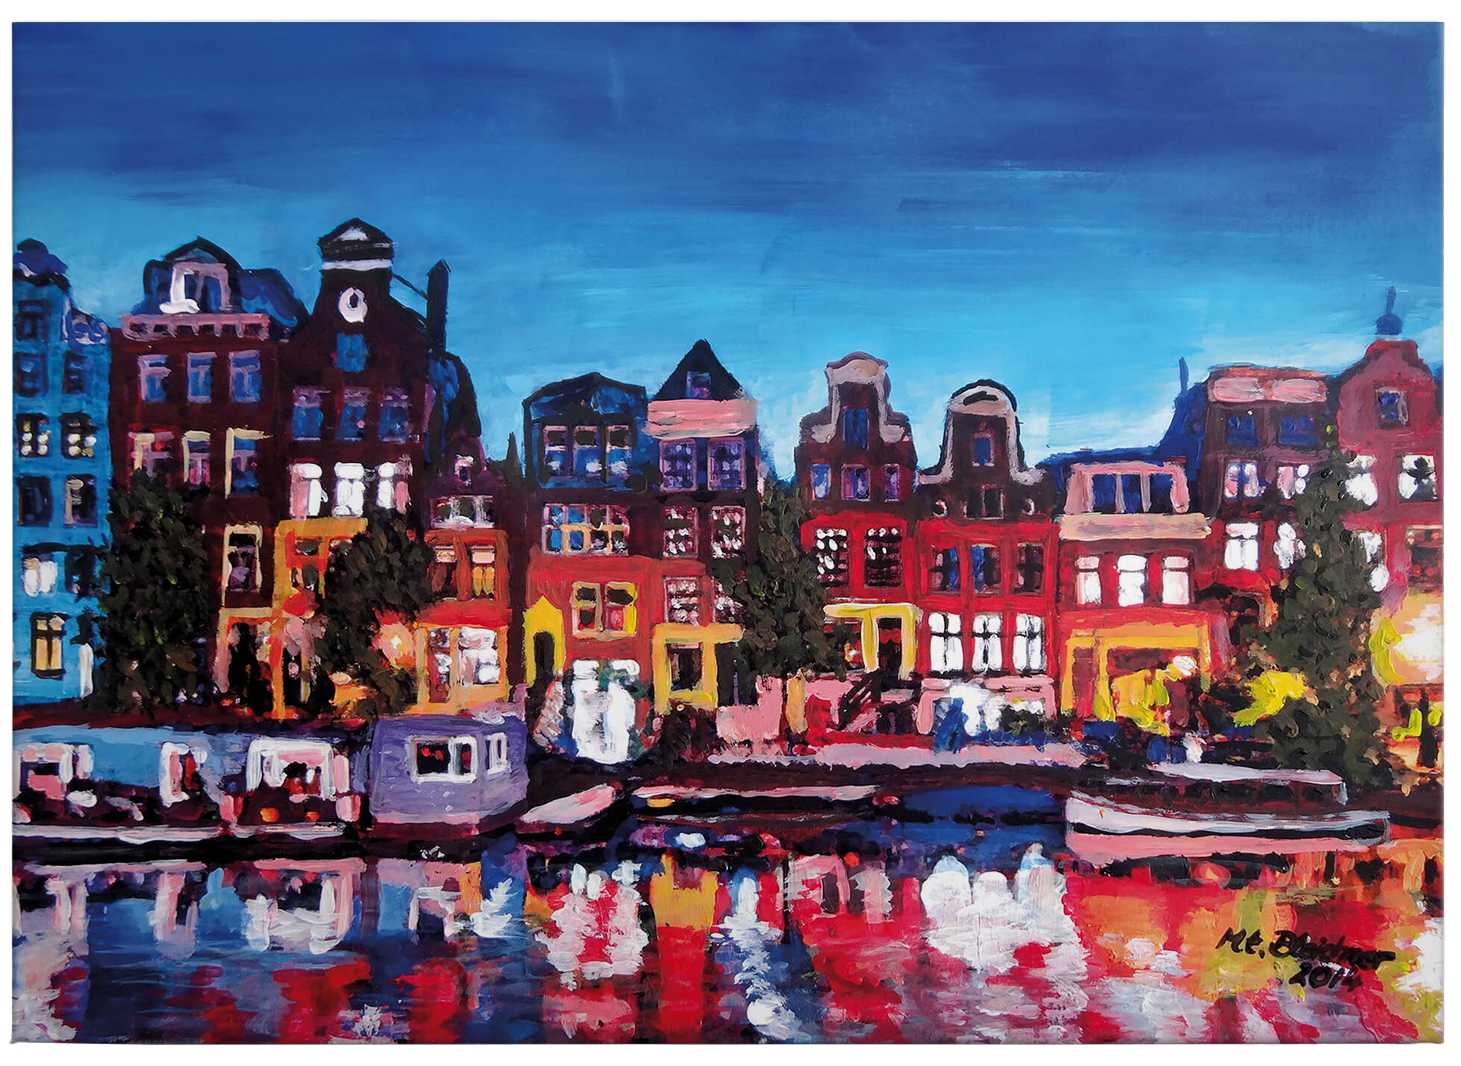             Canvas print "Amsterdam" by Bleichner painting
        